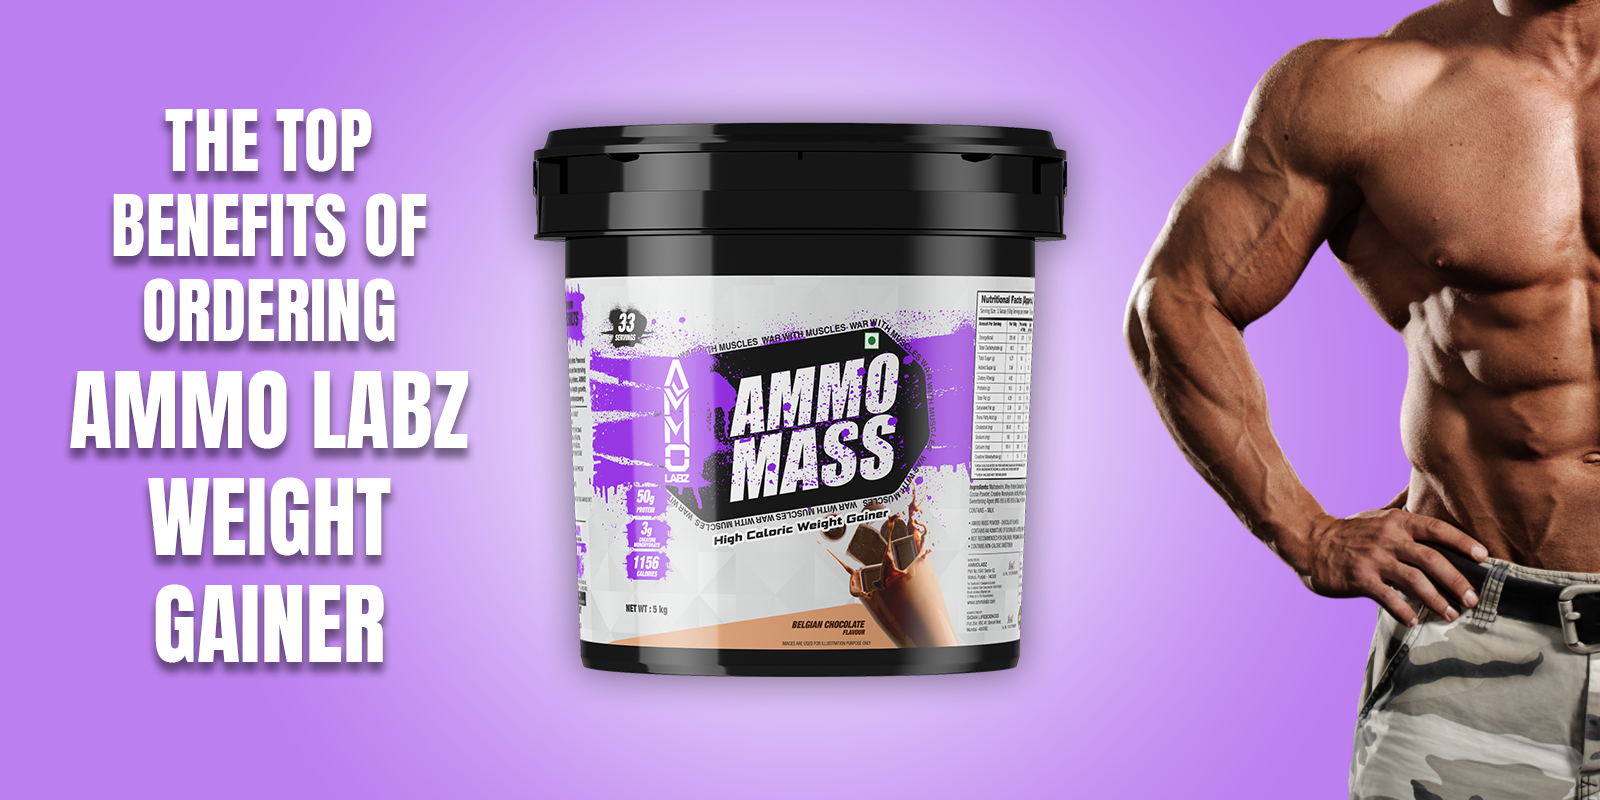 The Top Benefits of Ordering Ammo Labz Weight Gainer